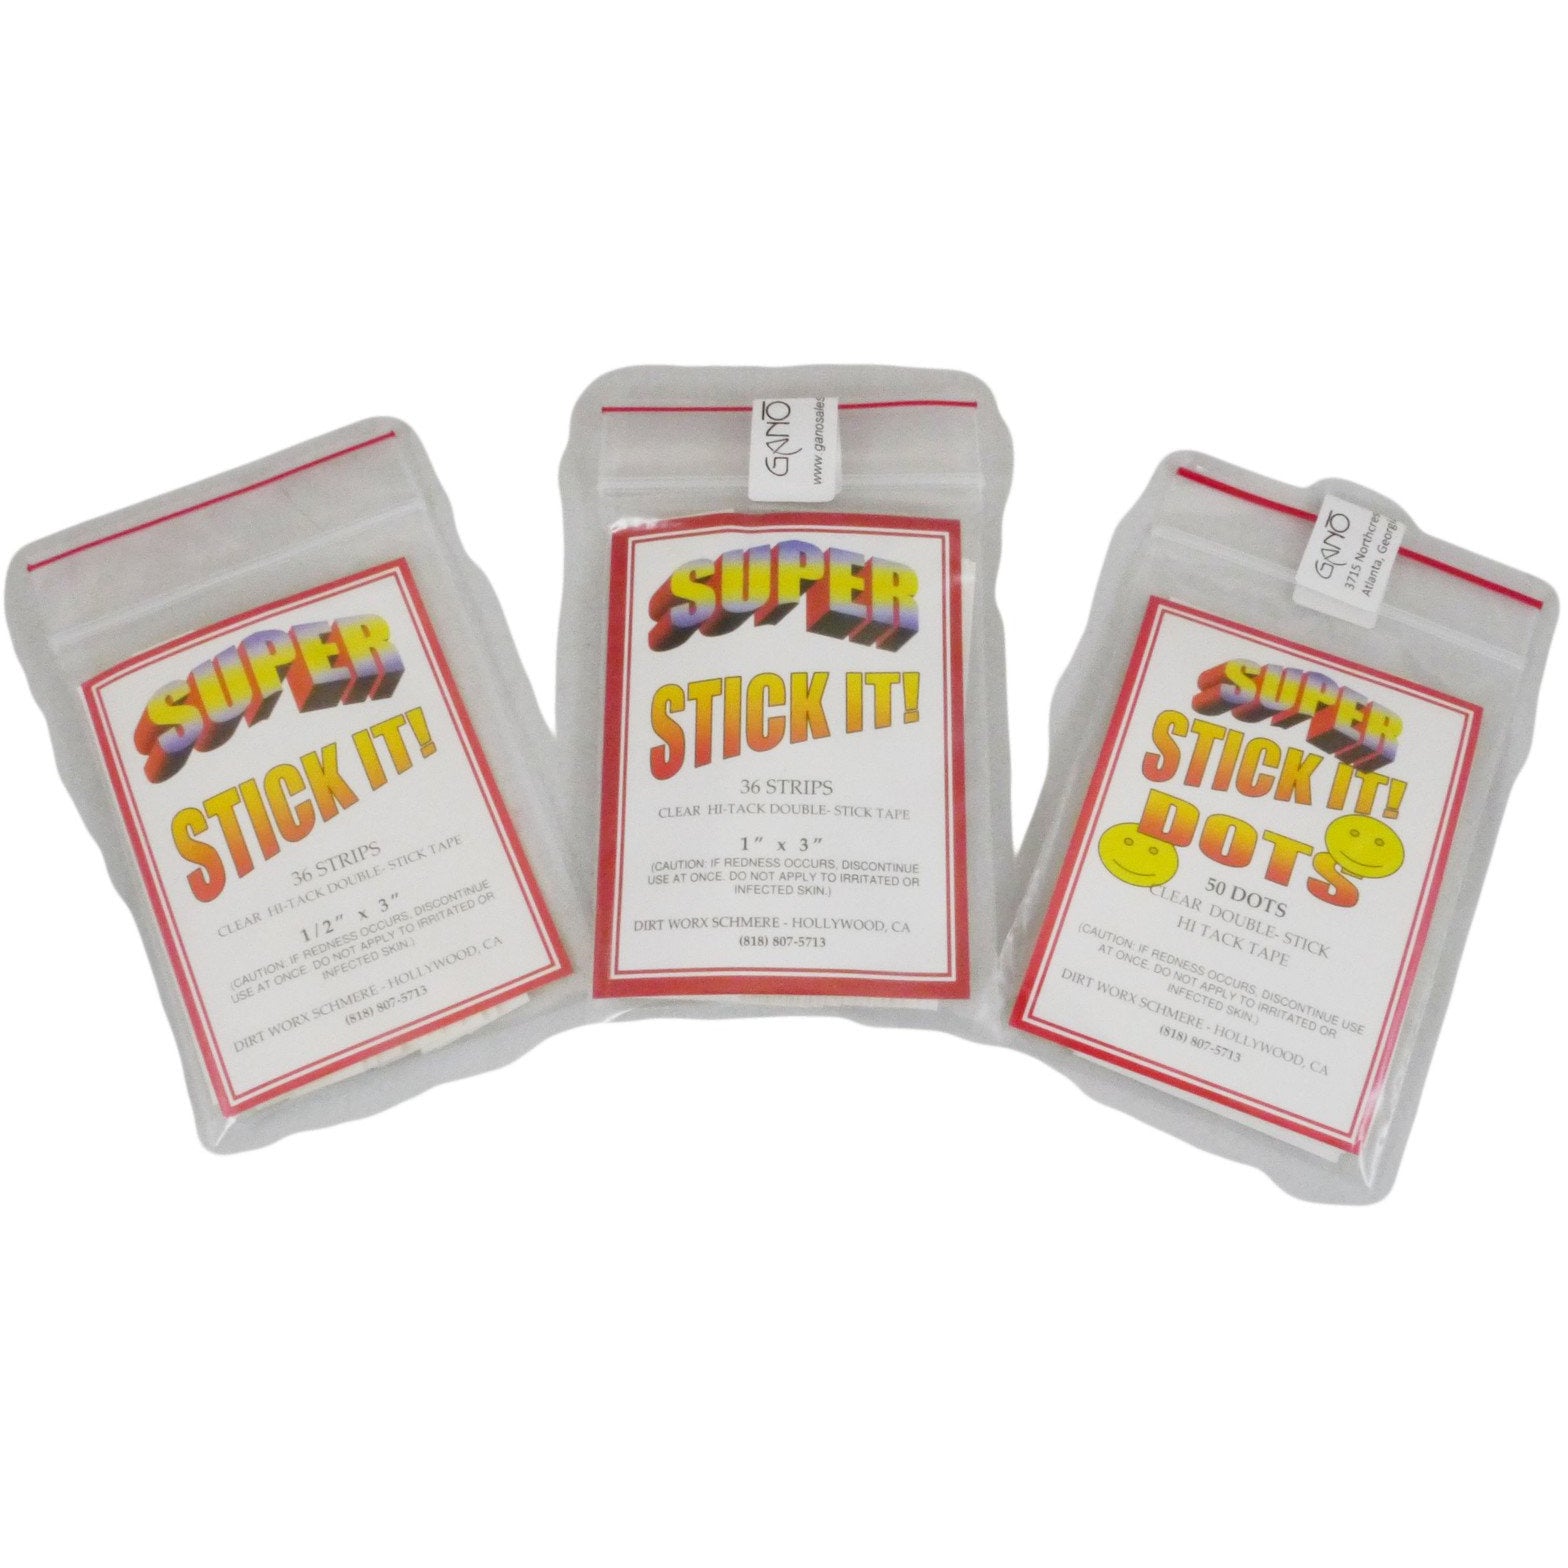 STICK IT! Double-Sided Tape, Assorted Sizes